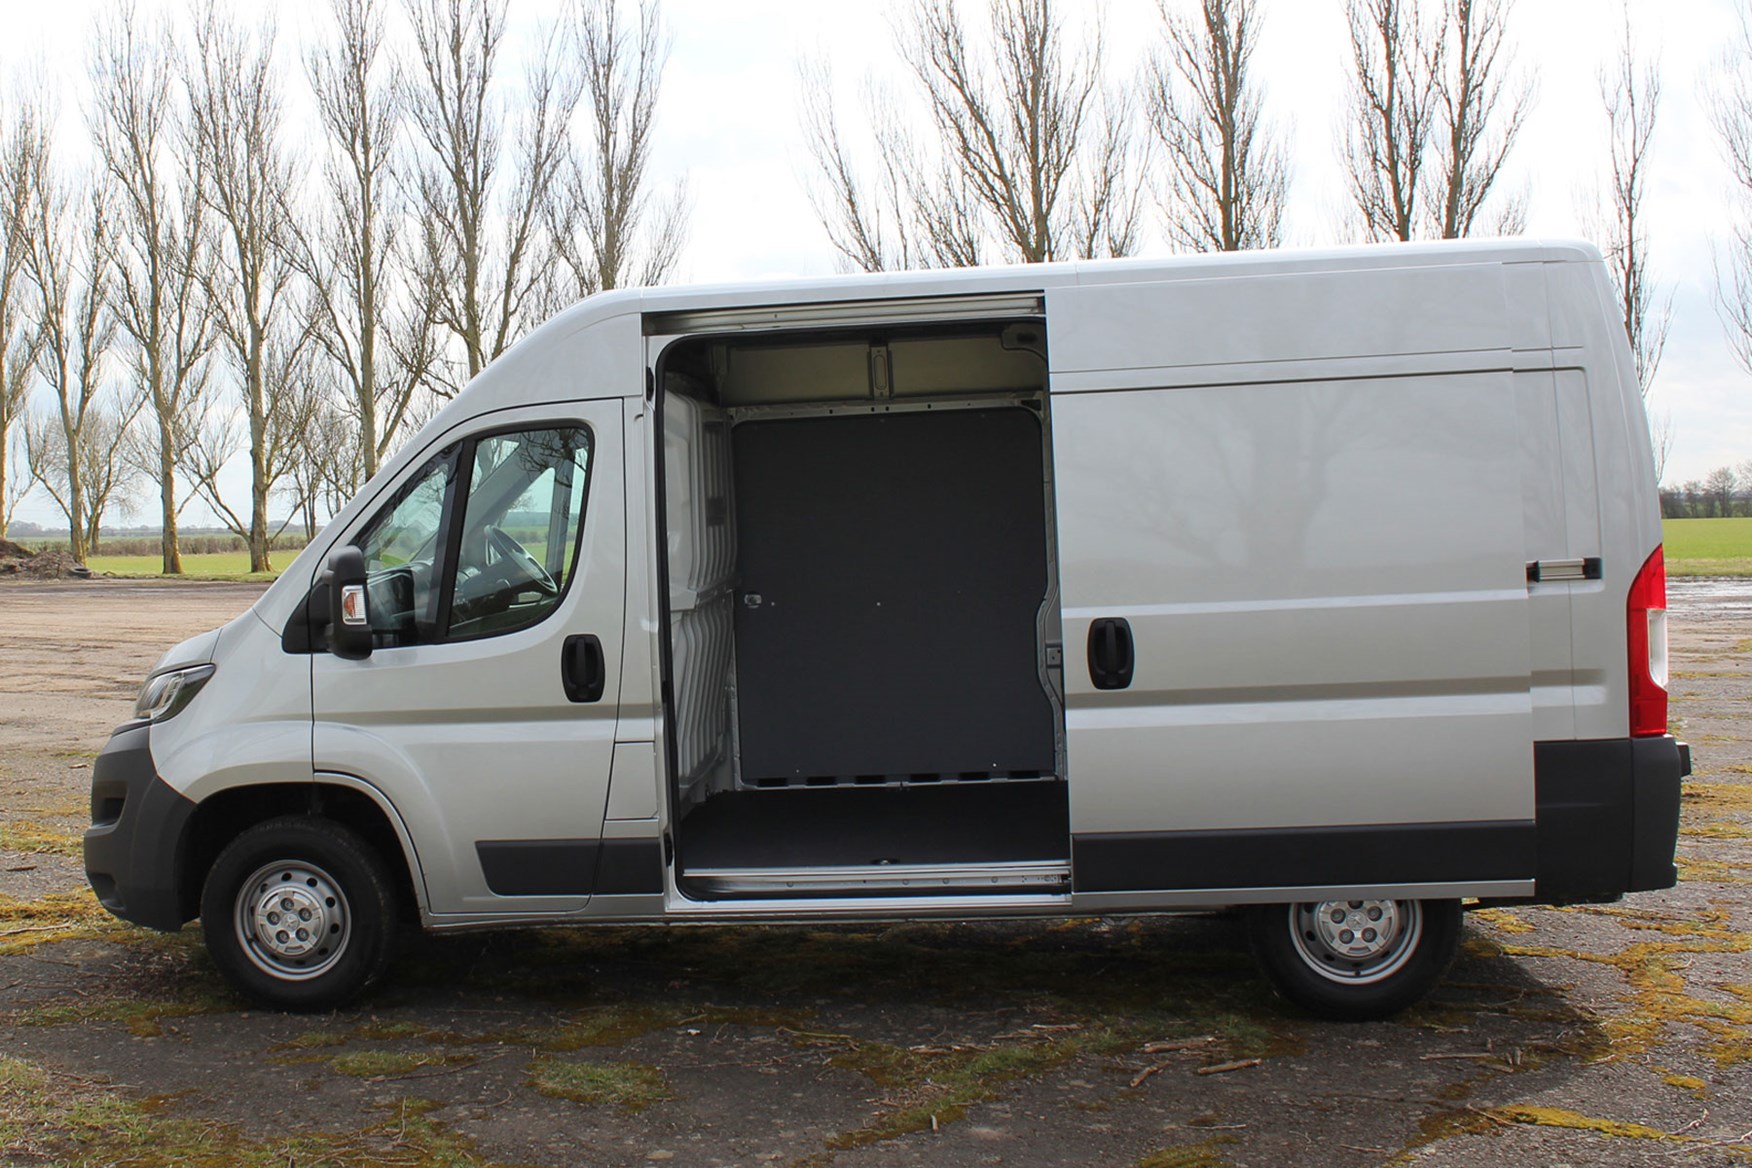 Peugeot Boxer dimensions - side view, side door open, silver